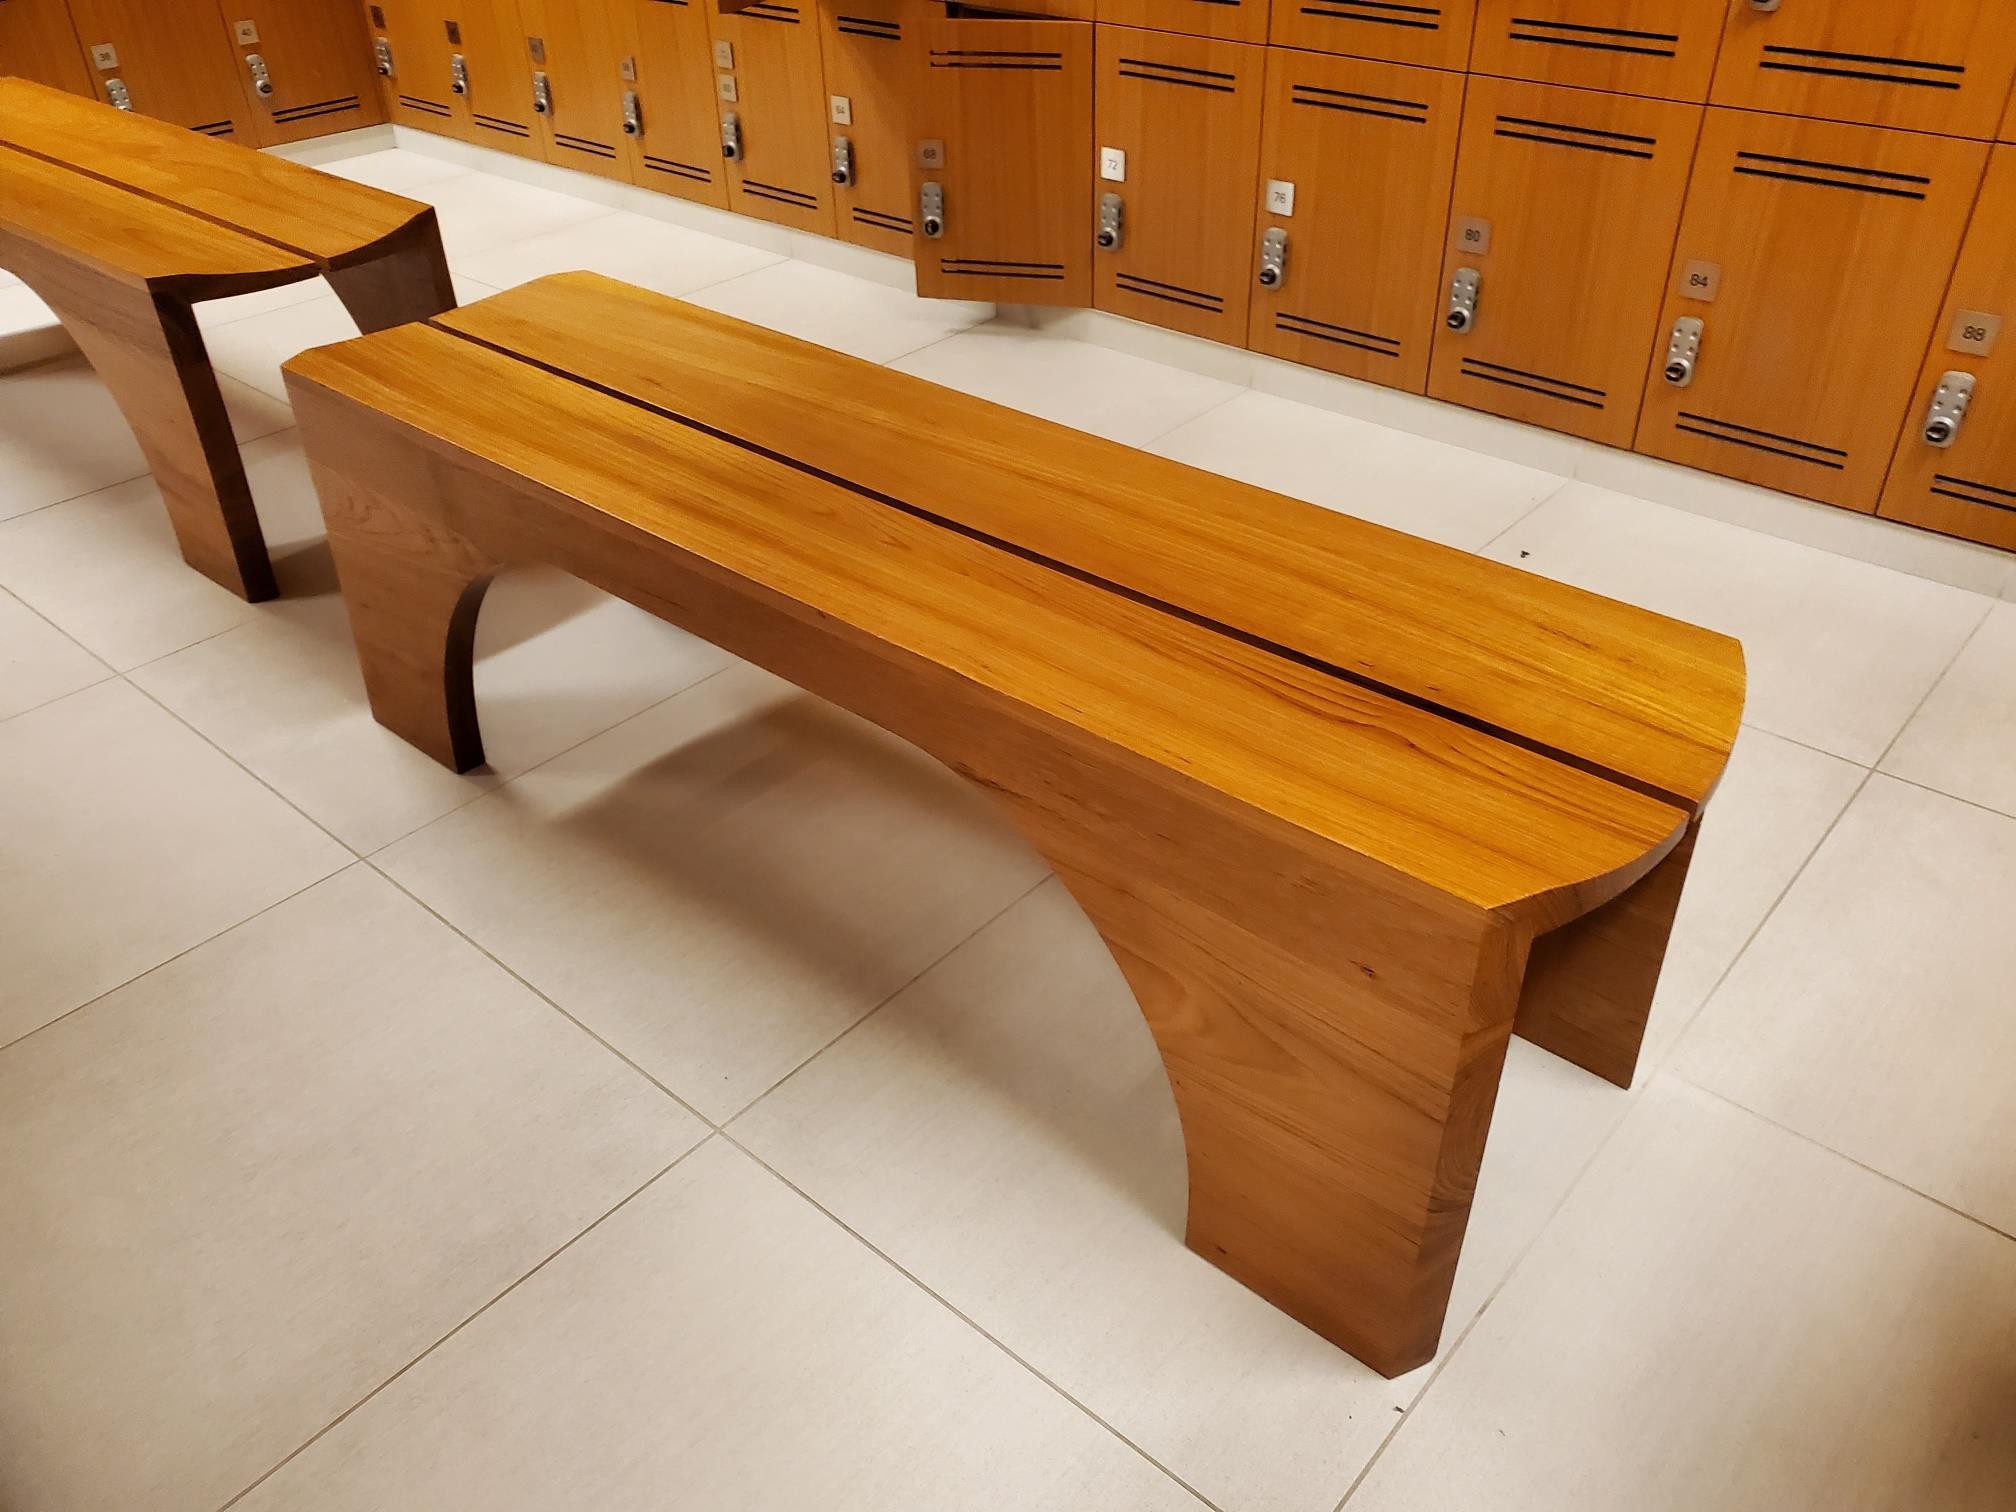 R6283 - Wooden Benches